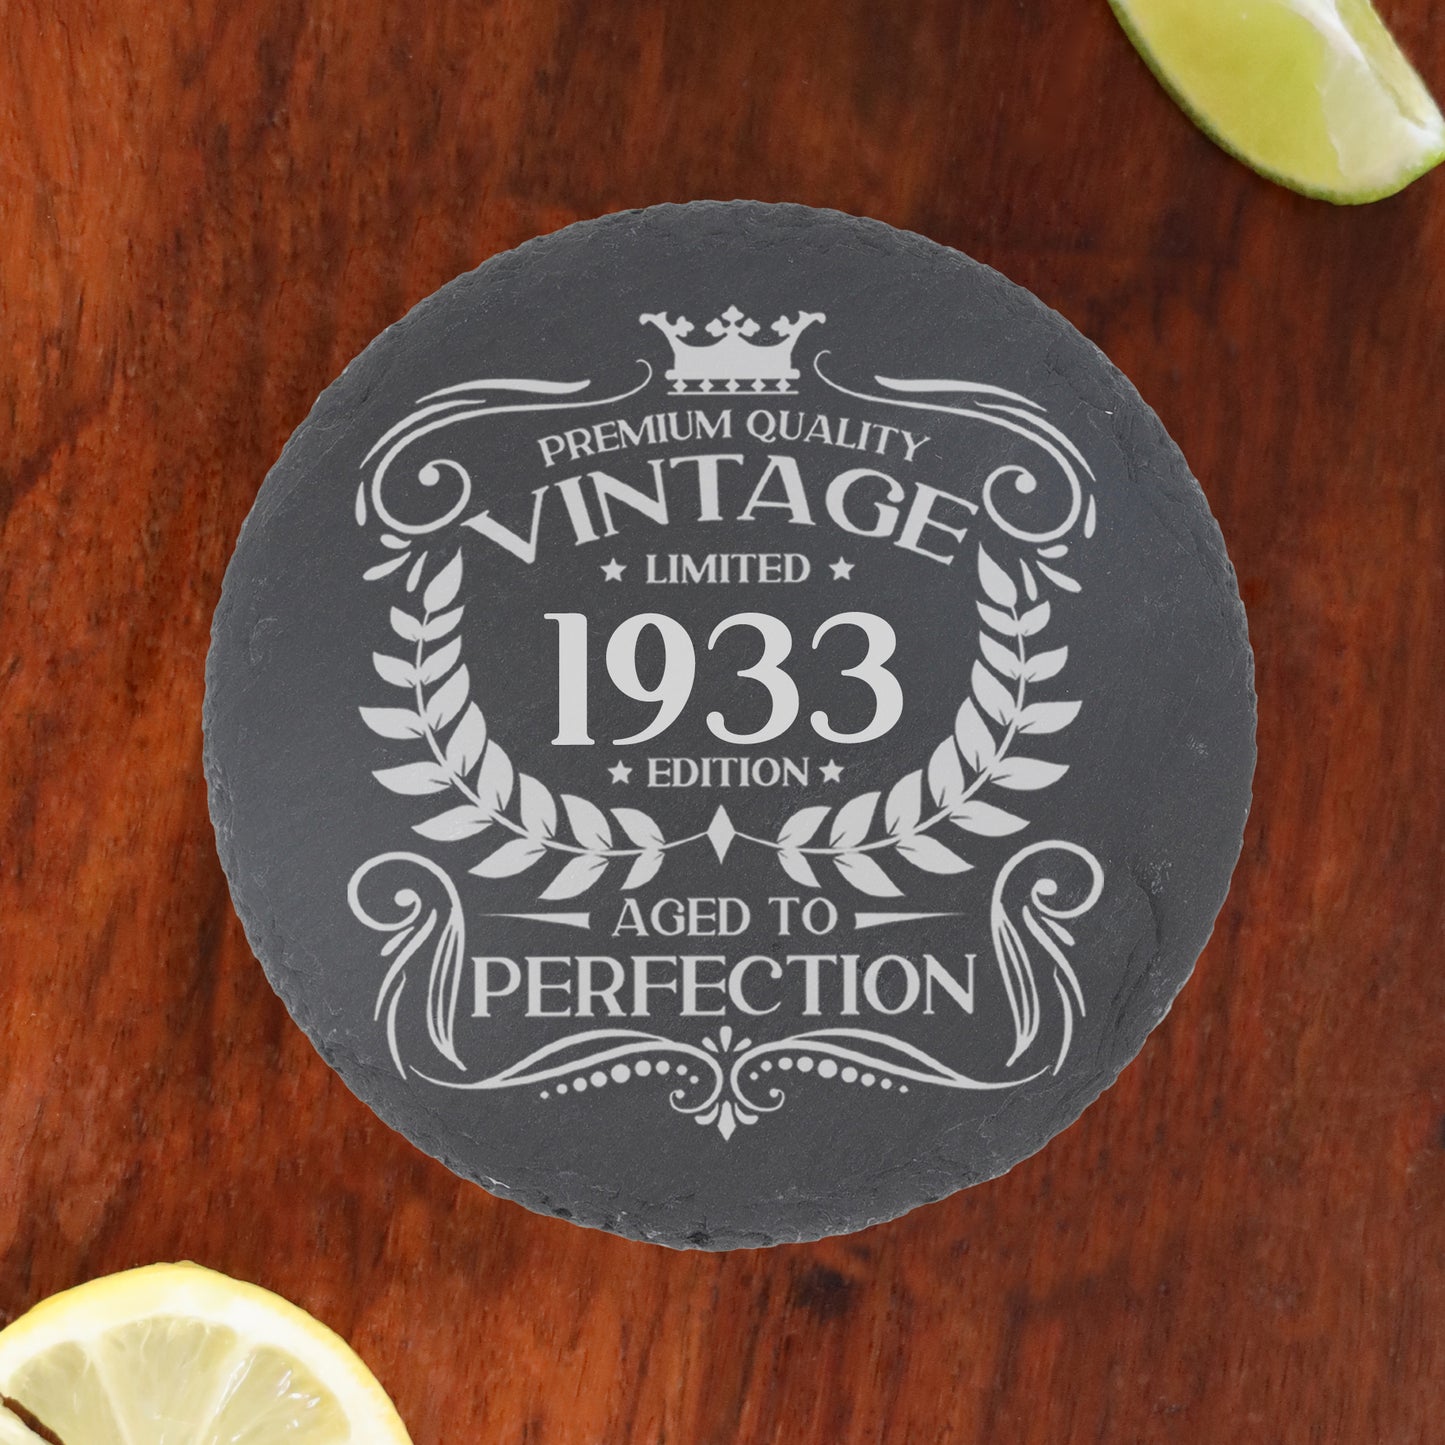 Personalised Vintage 1933 Mug and/or Coaster  - Always Looking Good - Round Coaster On Its Own  